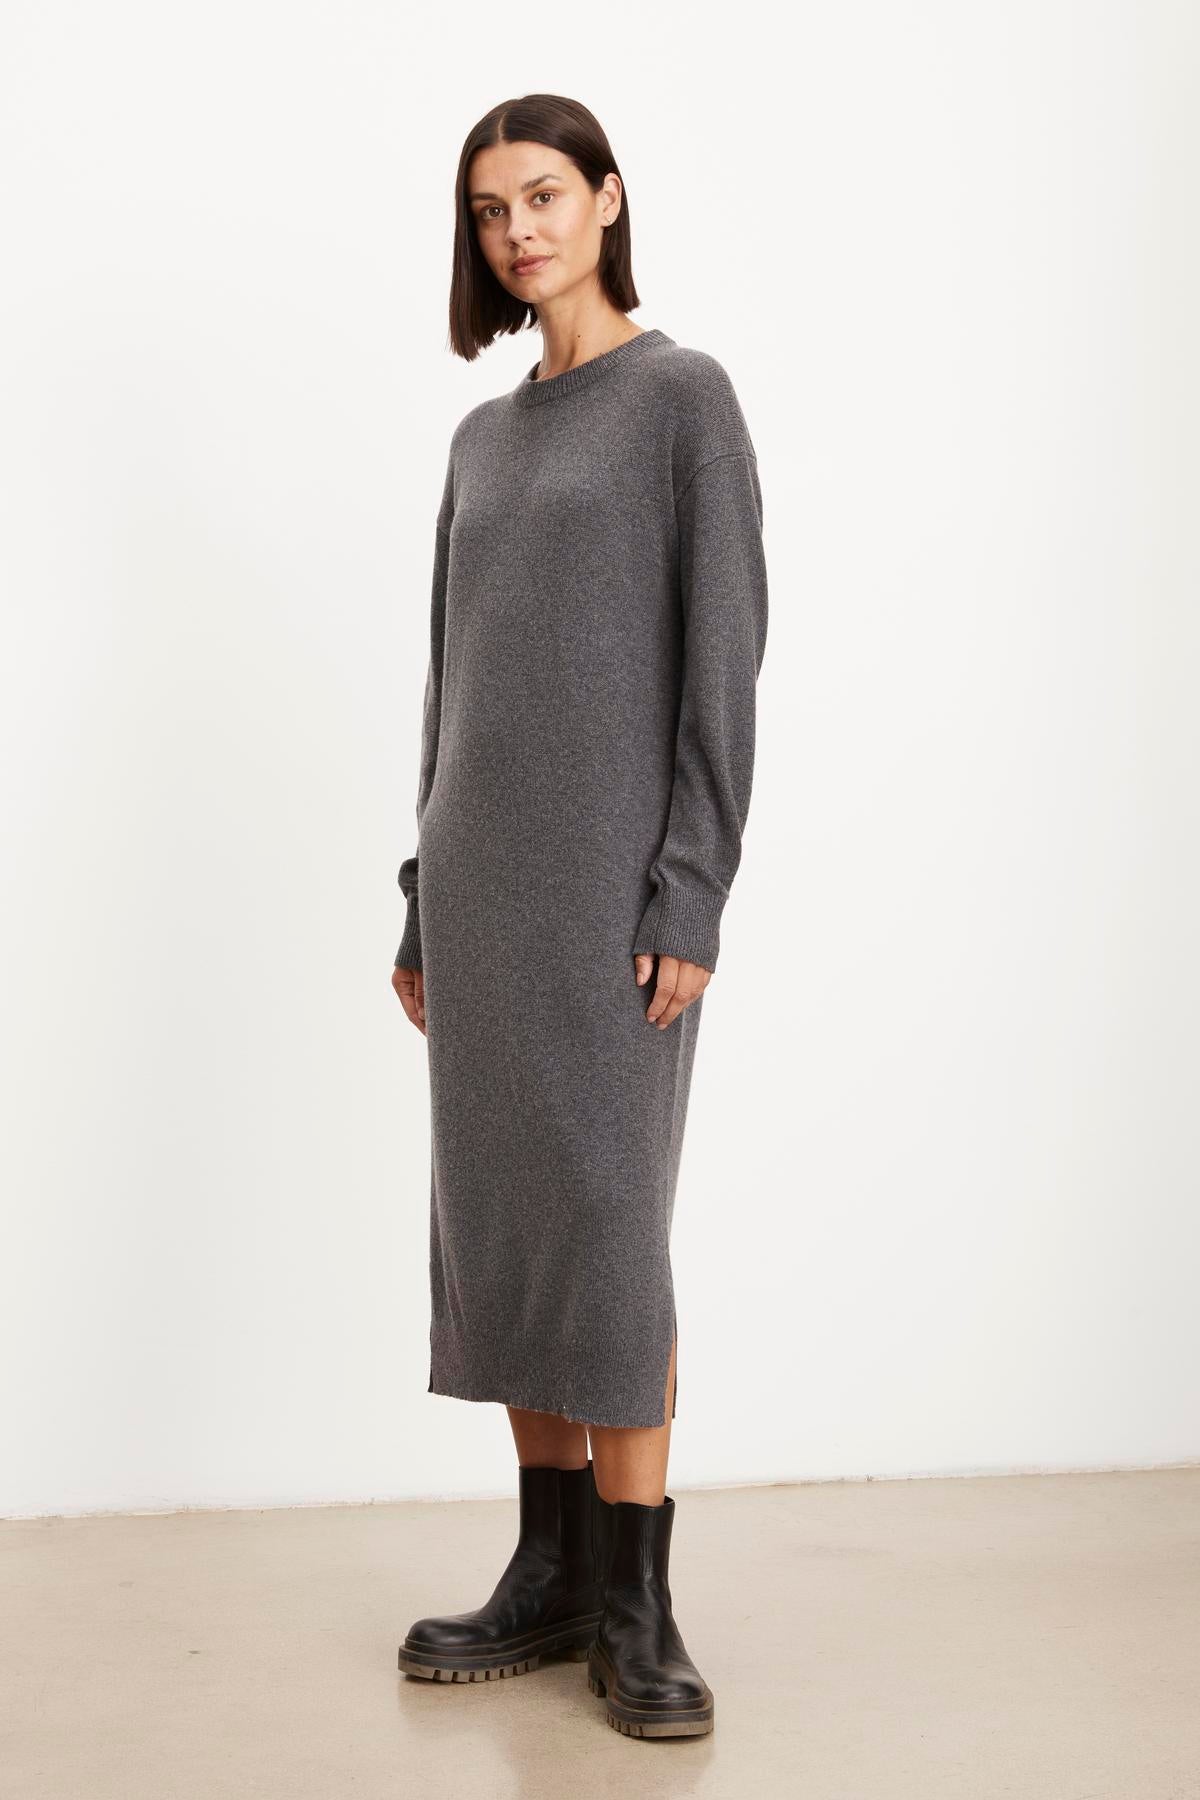 A woman stands wearing a long gray KADEN SWEATER DRESS by Velvet by Graham & Spencer with a side split hem and black combat boots, posing with her hands slightly tucked into the dress sides, against a plain white background.-35655585267905